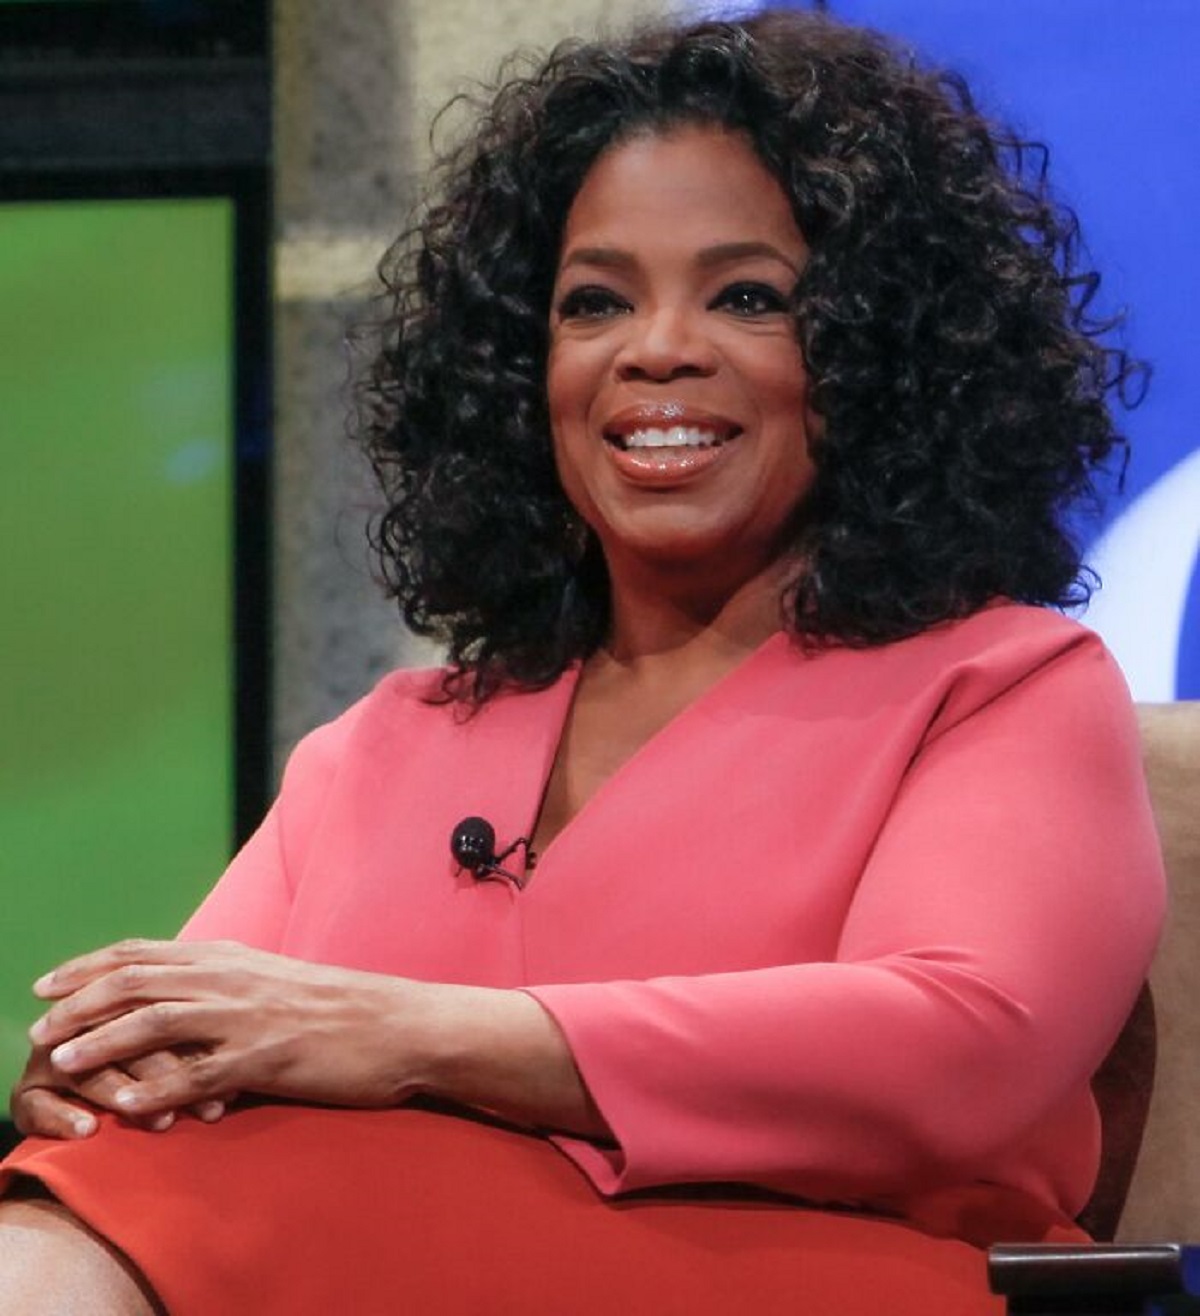 Oprah Winfrey. She has platformed so many terrible humans, scam artists, and snake oil salesmen it’s unbelievable.